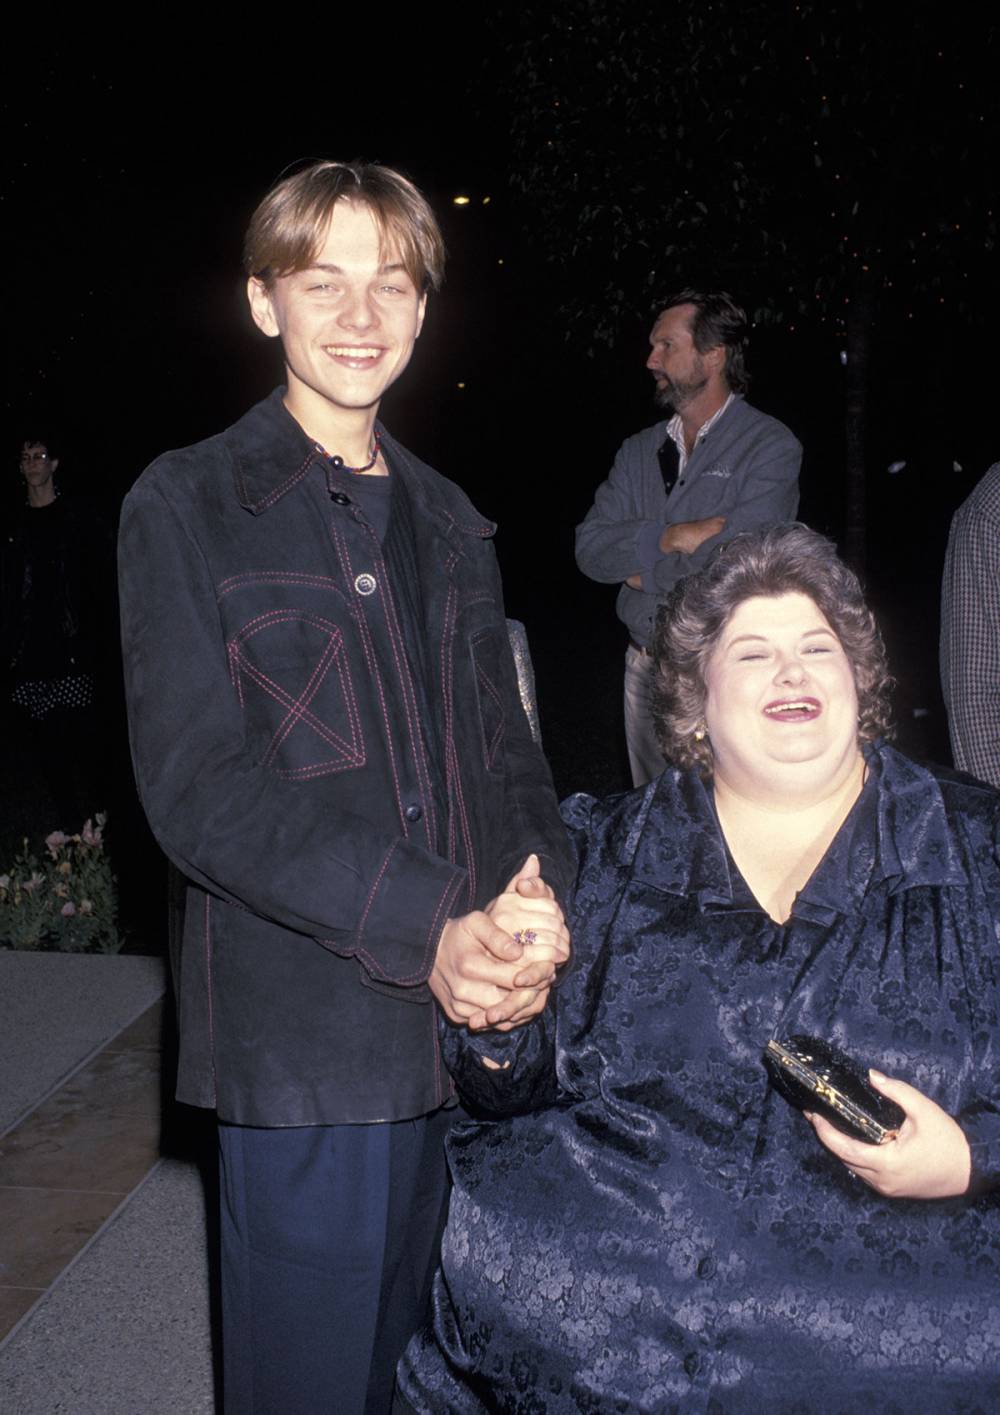 Leonardo DiCaprio and Darlene Cates at the 1993 Premiere of their movie